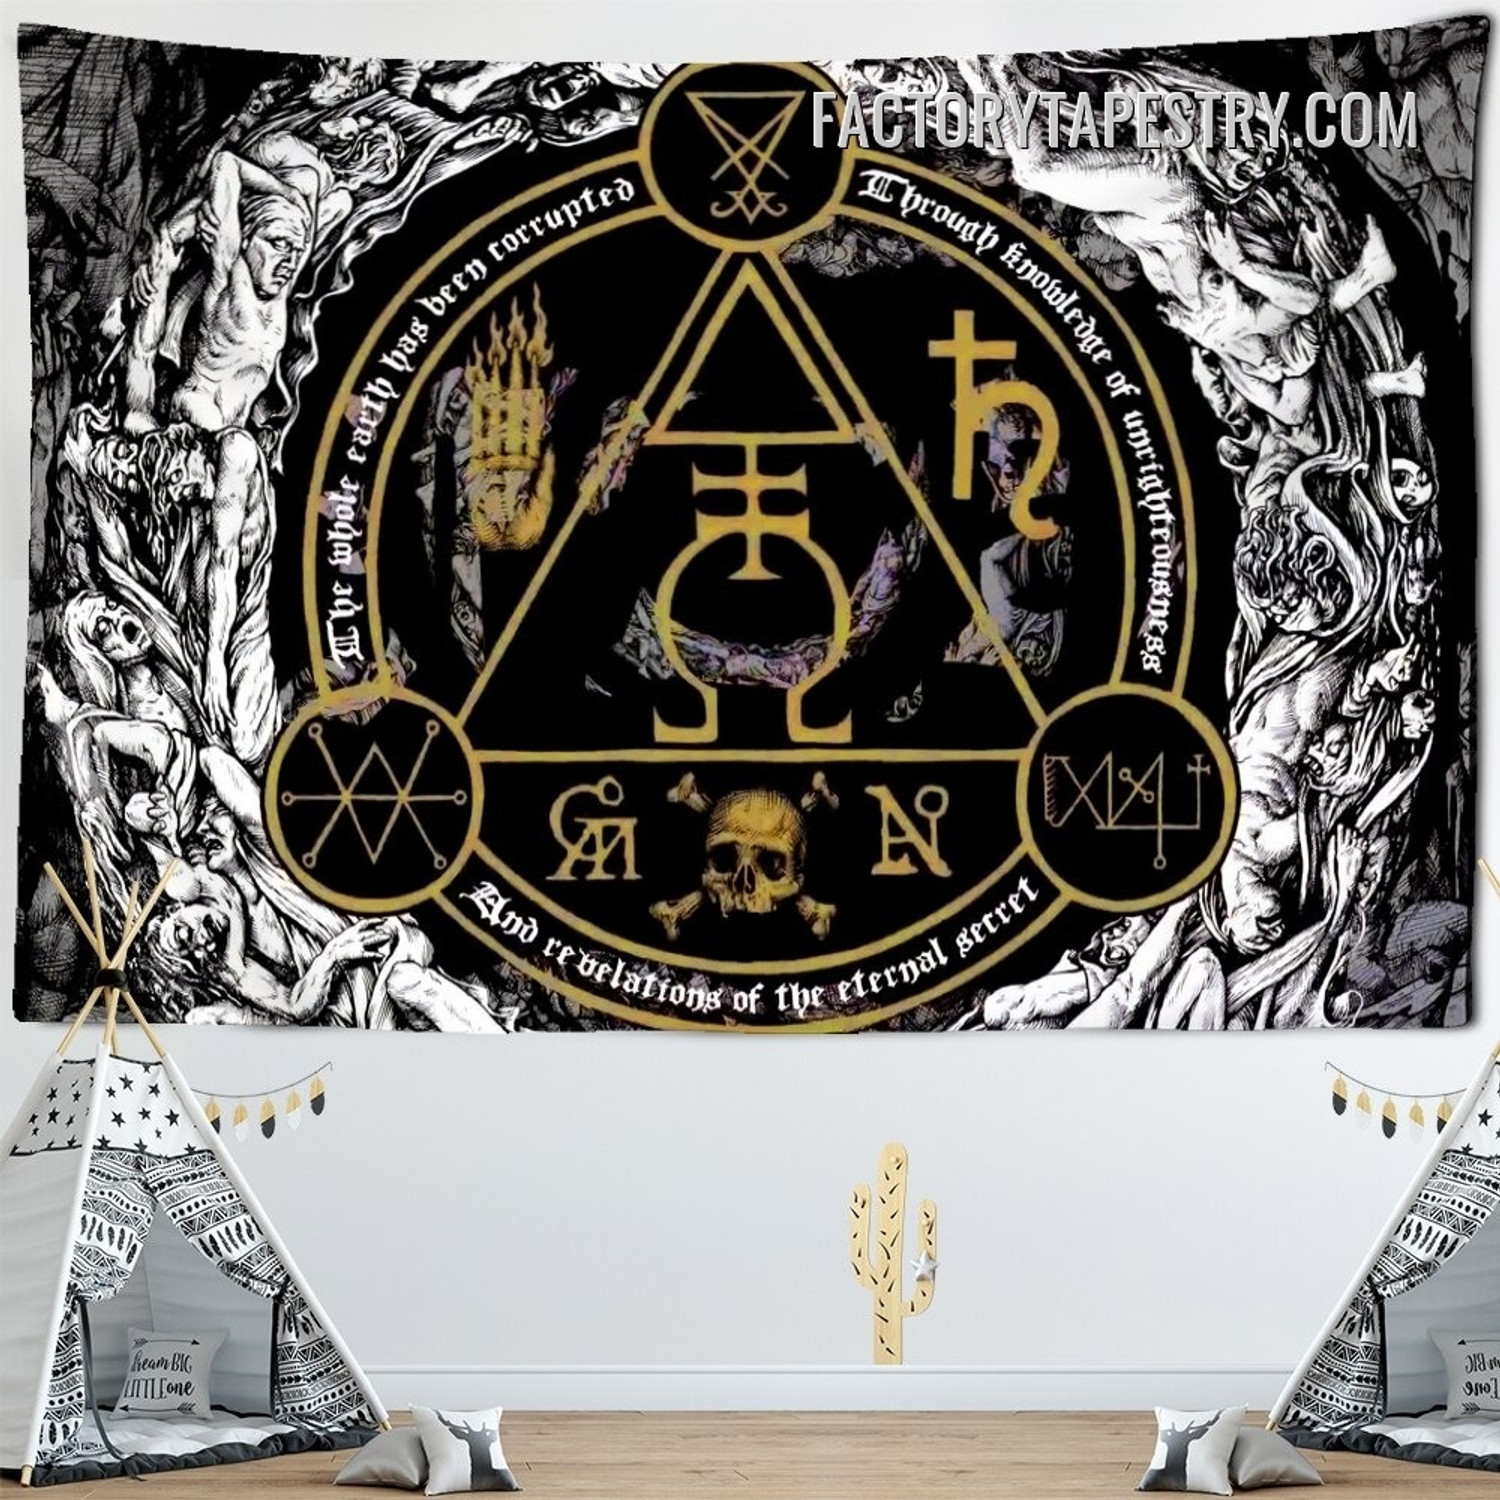 Goatwhore I Tarot Psychedelic Wall Hanging Tapestry